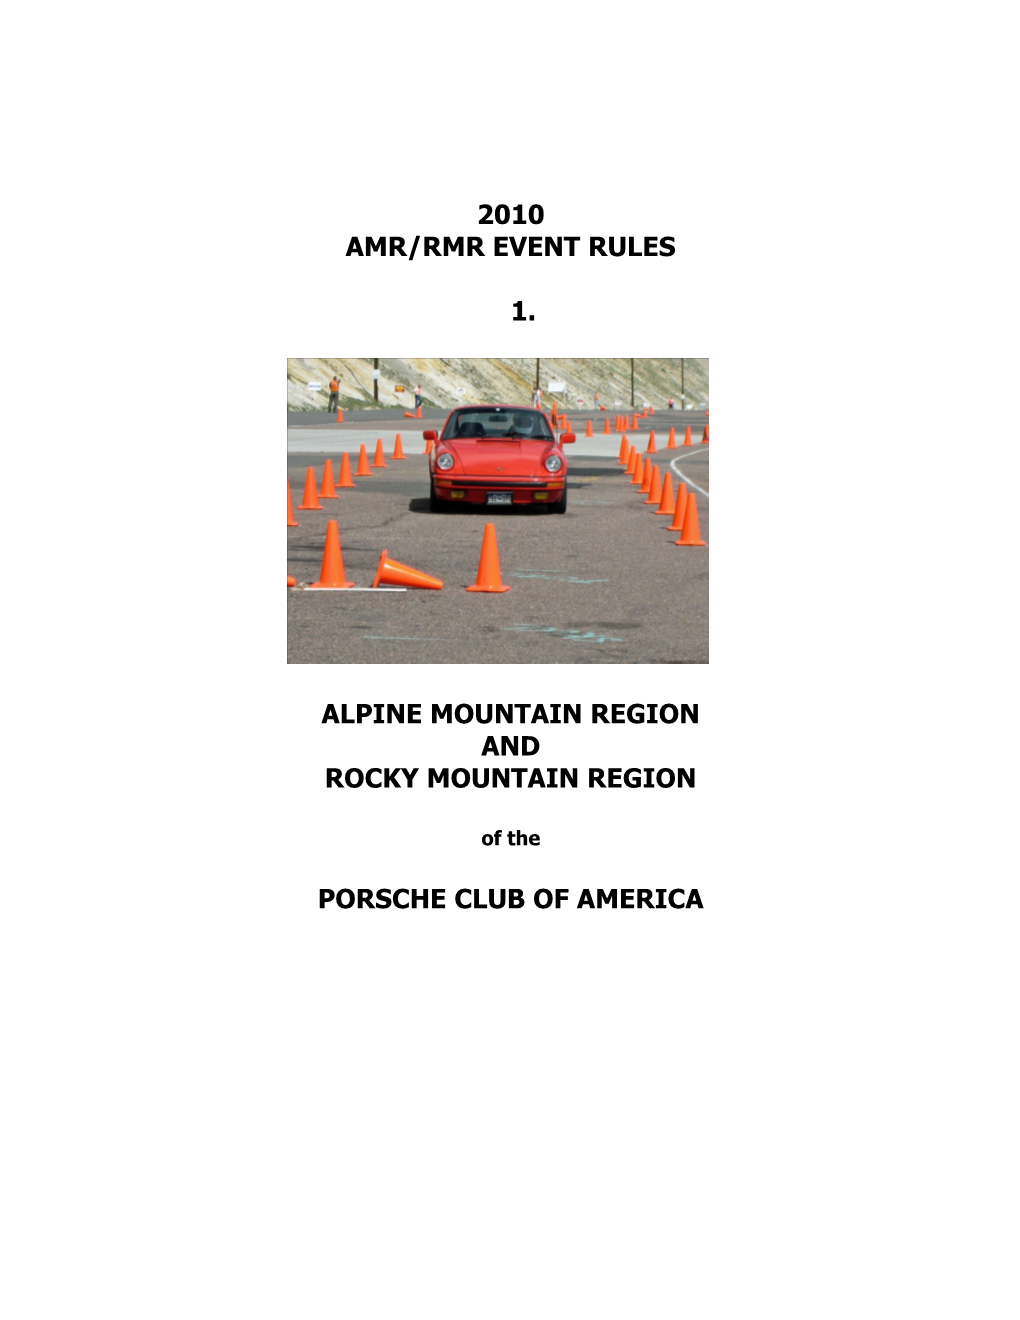 Amr/Rmr Event Rules